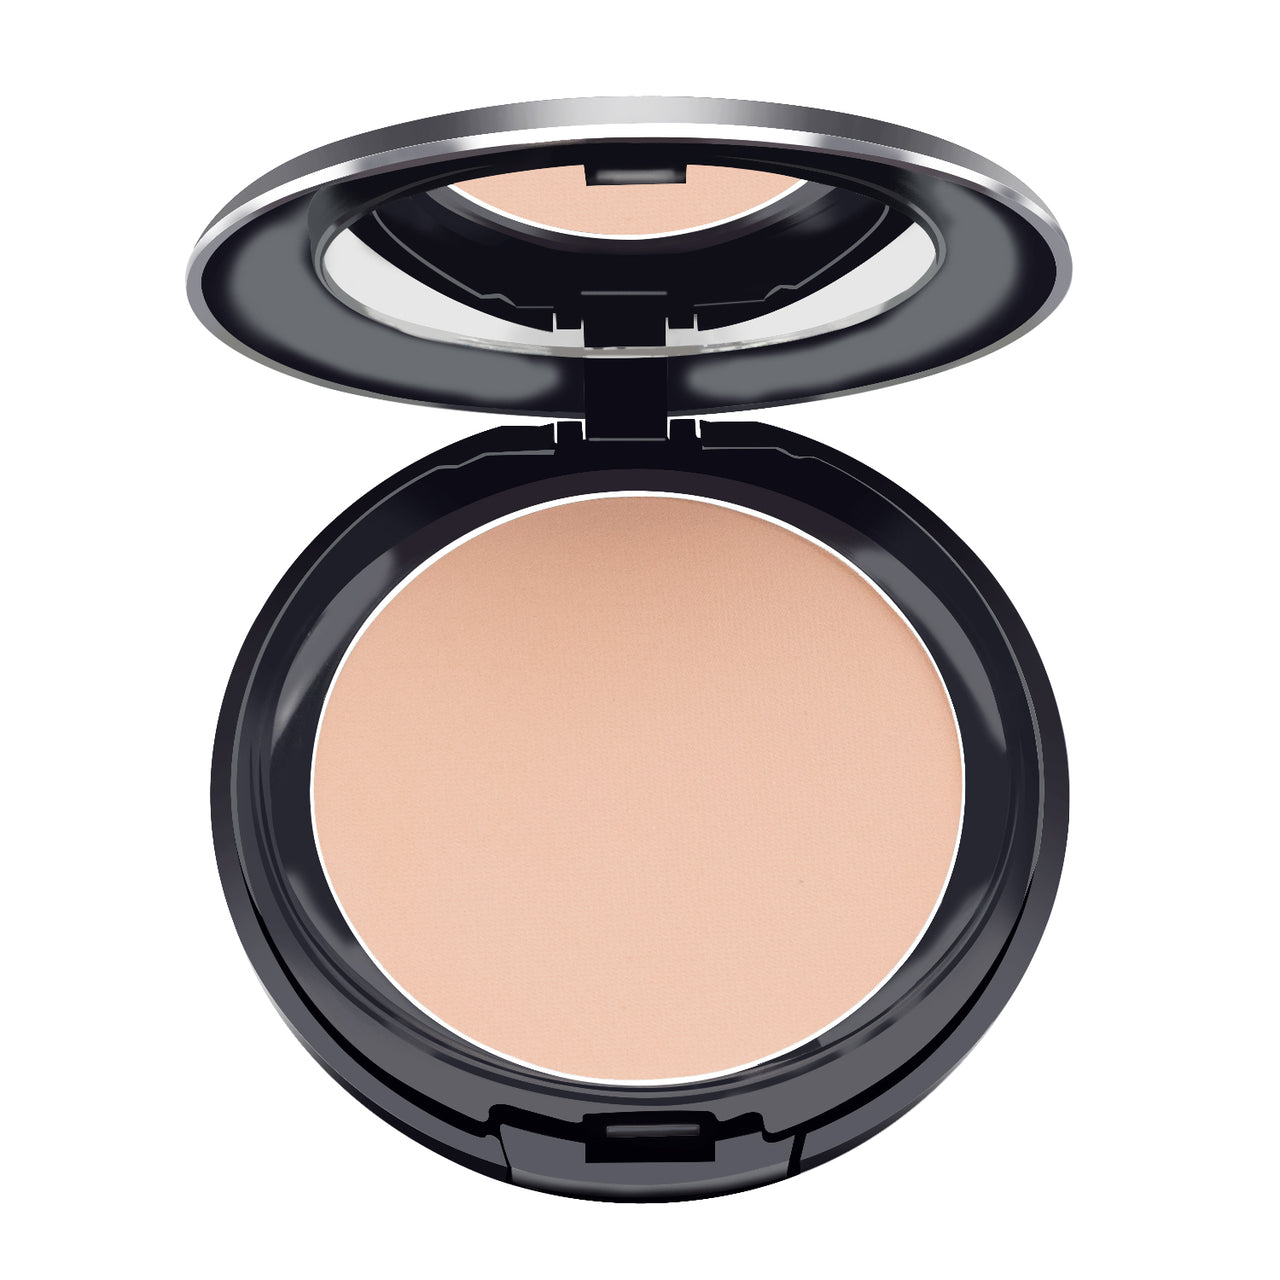 Glamgals Hollywood-U.S.A 3 In 1 Three Way Cake Compact Makeup+ Foundation + Concealer Spf 15, (Natural Skin) - Distacart